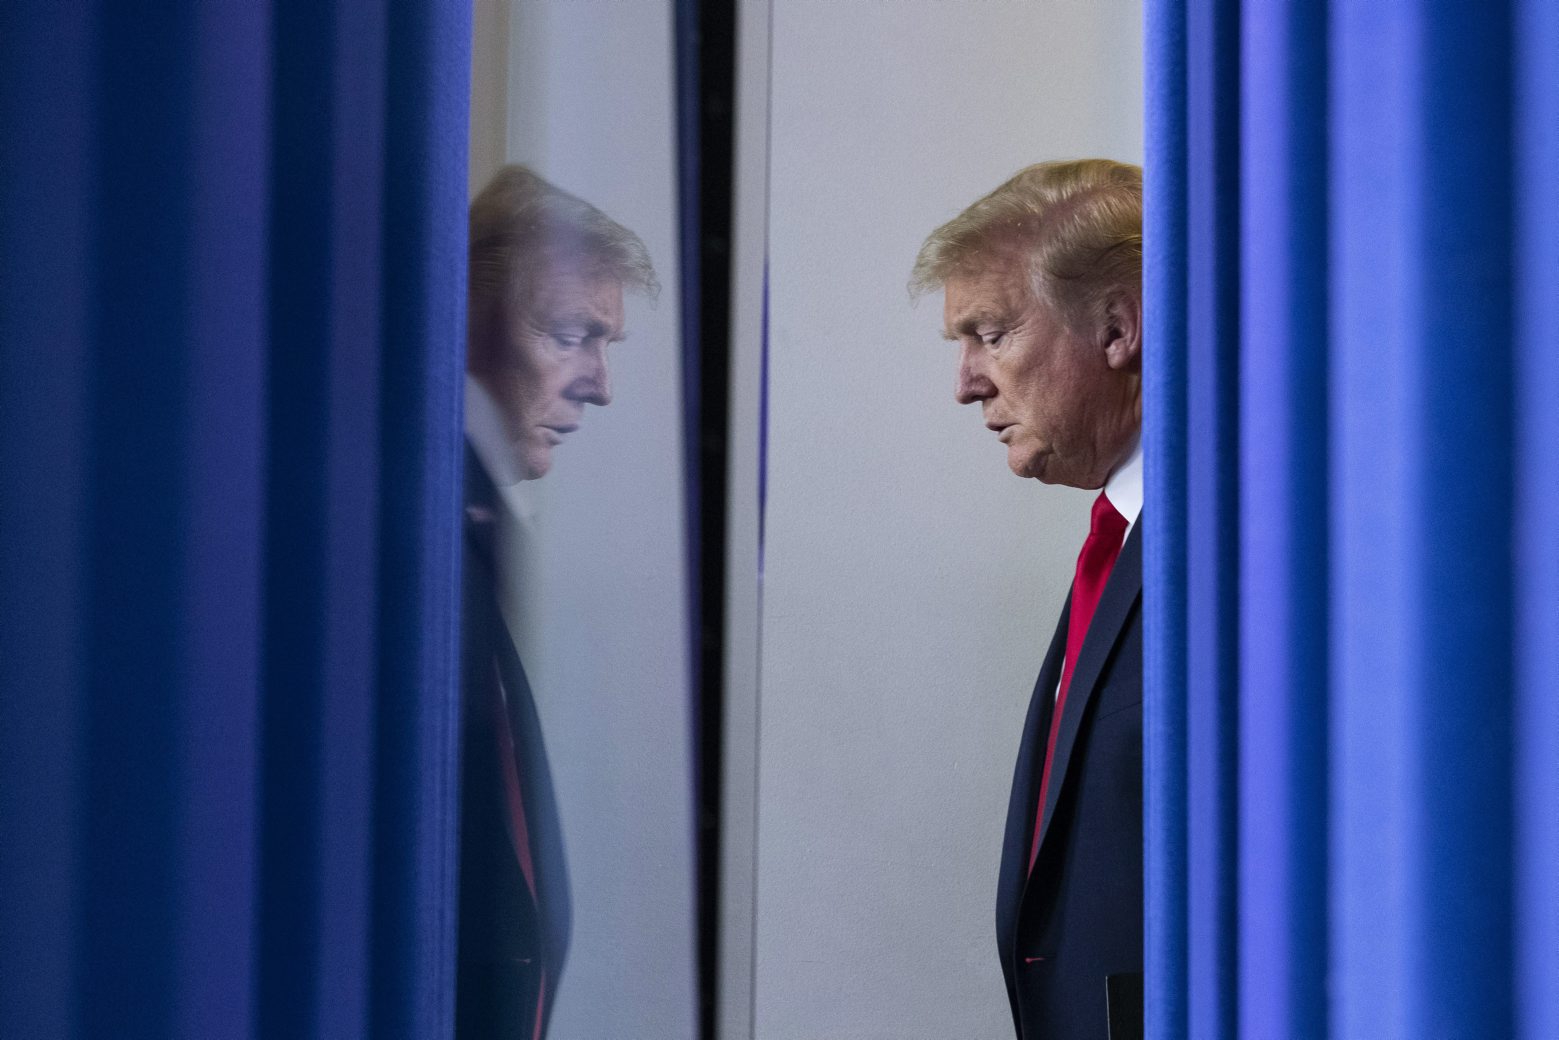 President Donald Trump arrives to speak about the coronavirus in the James Brady Press Briefing Room of the White House, Wednesday, April 22, 2020, in Washington. (AP Photo/Alex Brandon)
Donald Trump Pictures of the Week in North America Photo Gallery